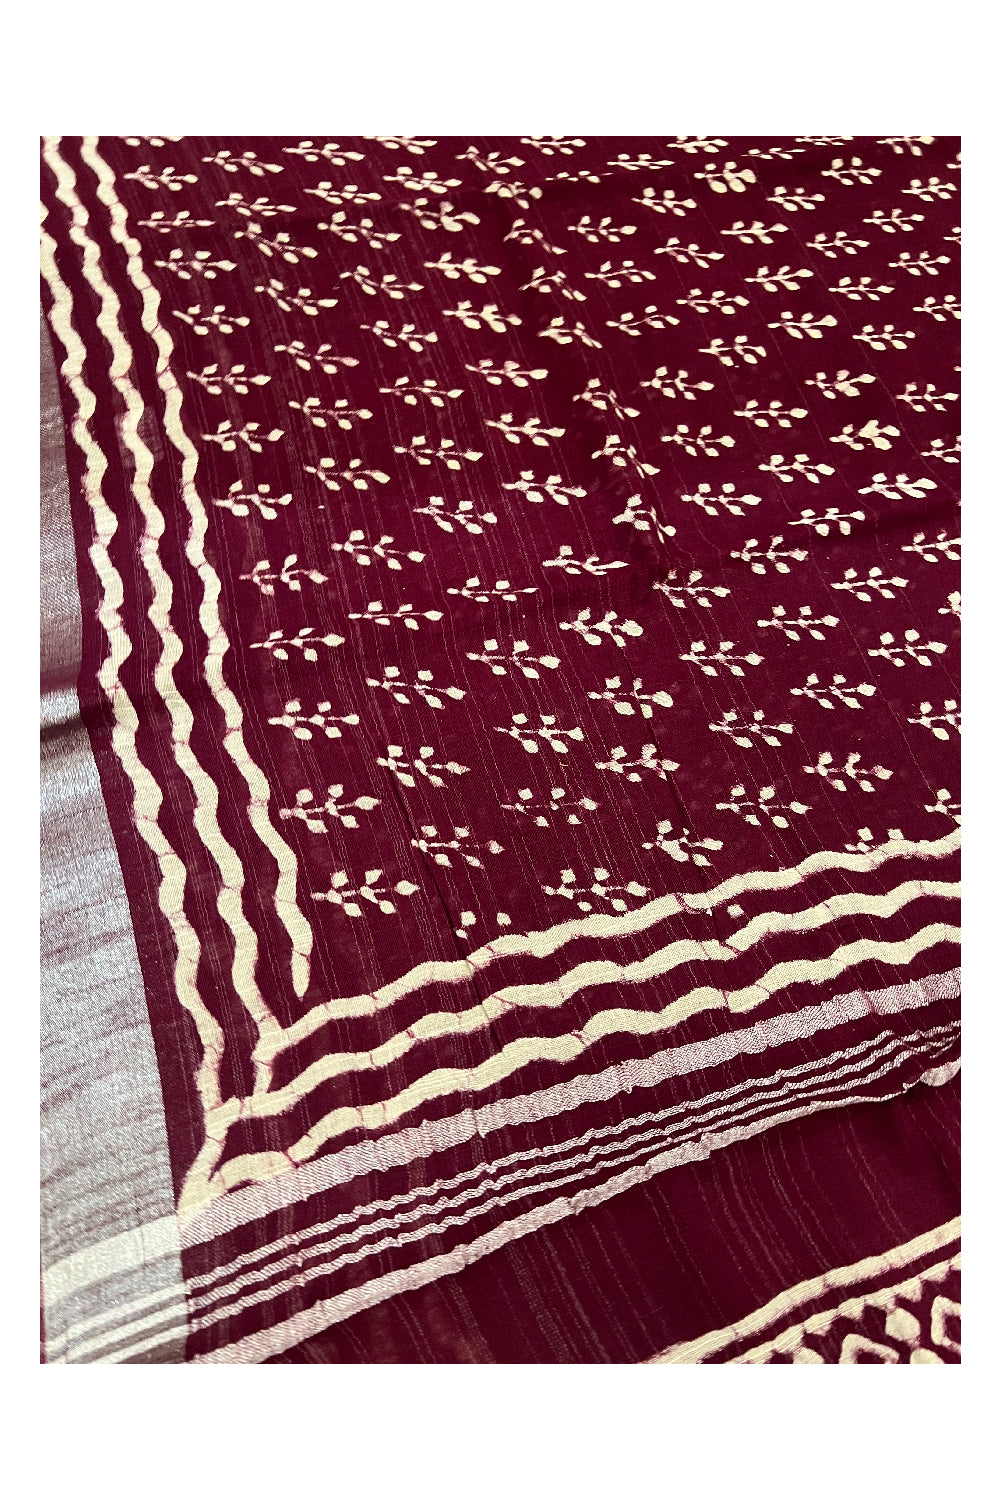 Southloom Linen Maroon Saree with White Designer Prints and Tassels works on Pallu